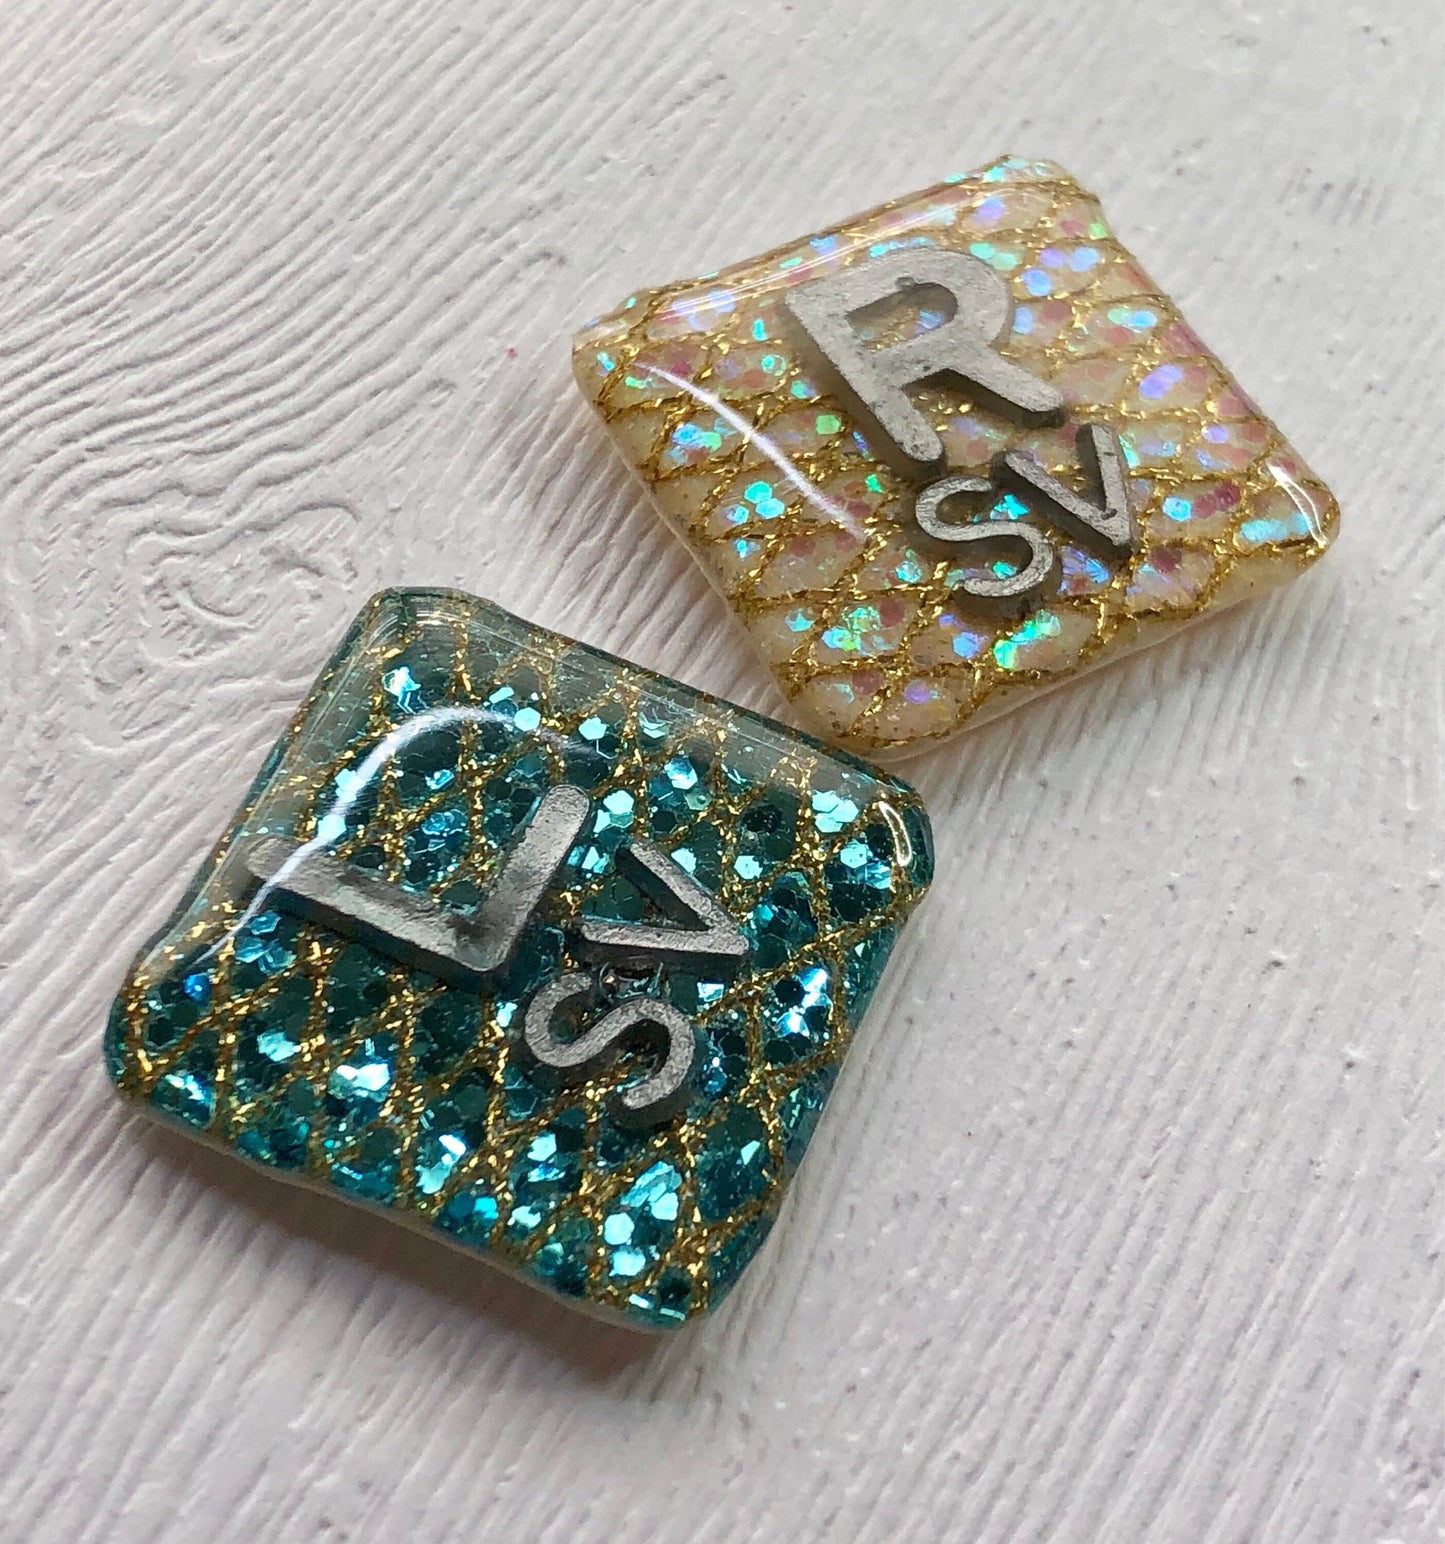 Fancy Square Xray Markers Customized w/ Initals Teal/Tan